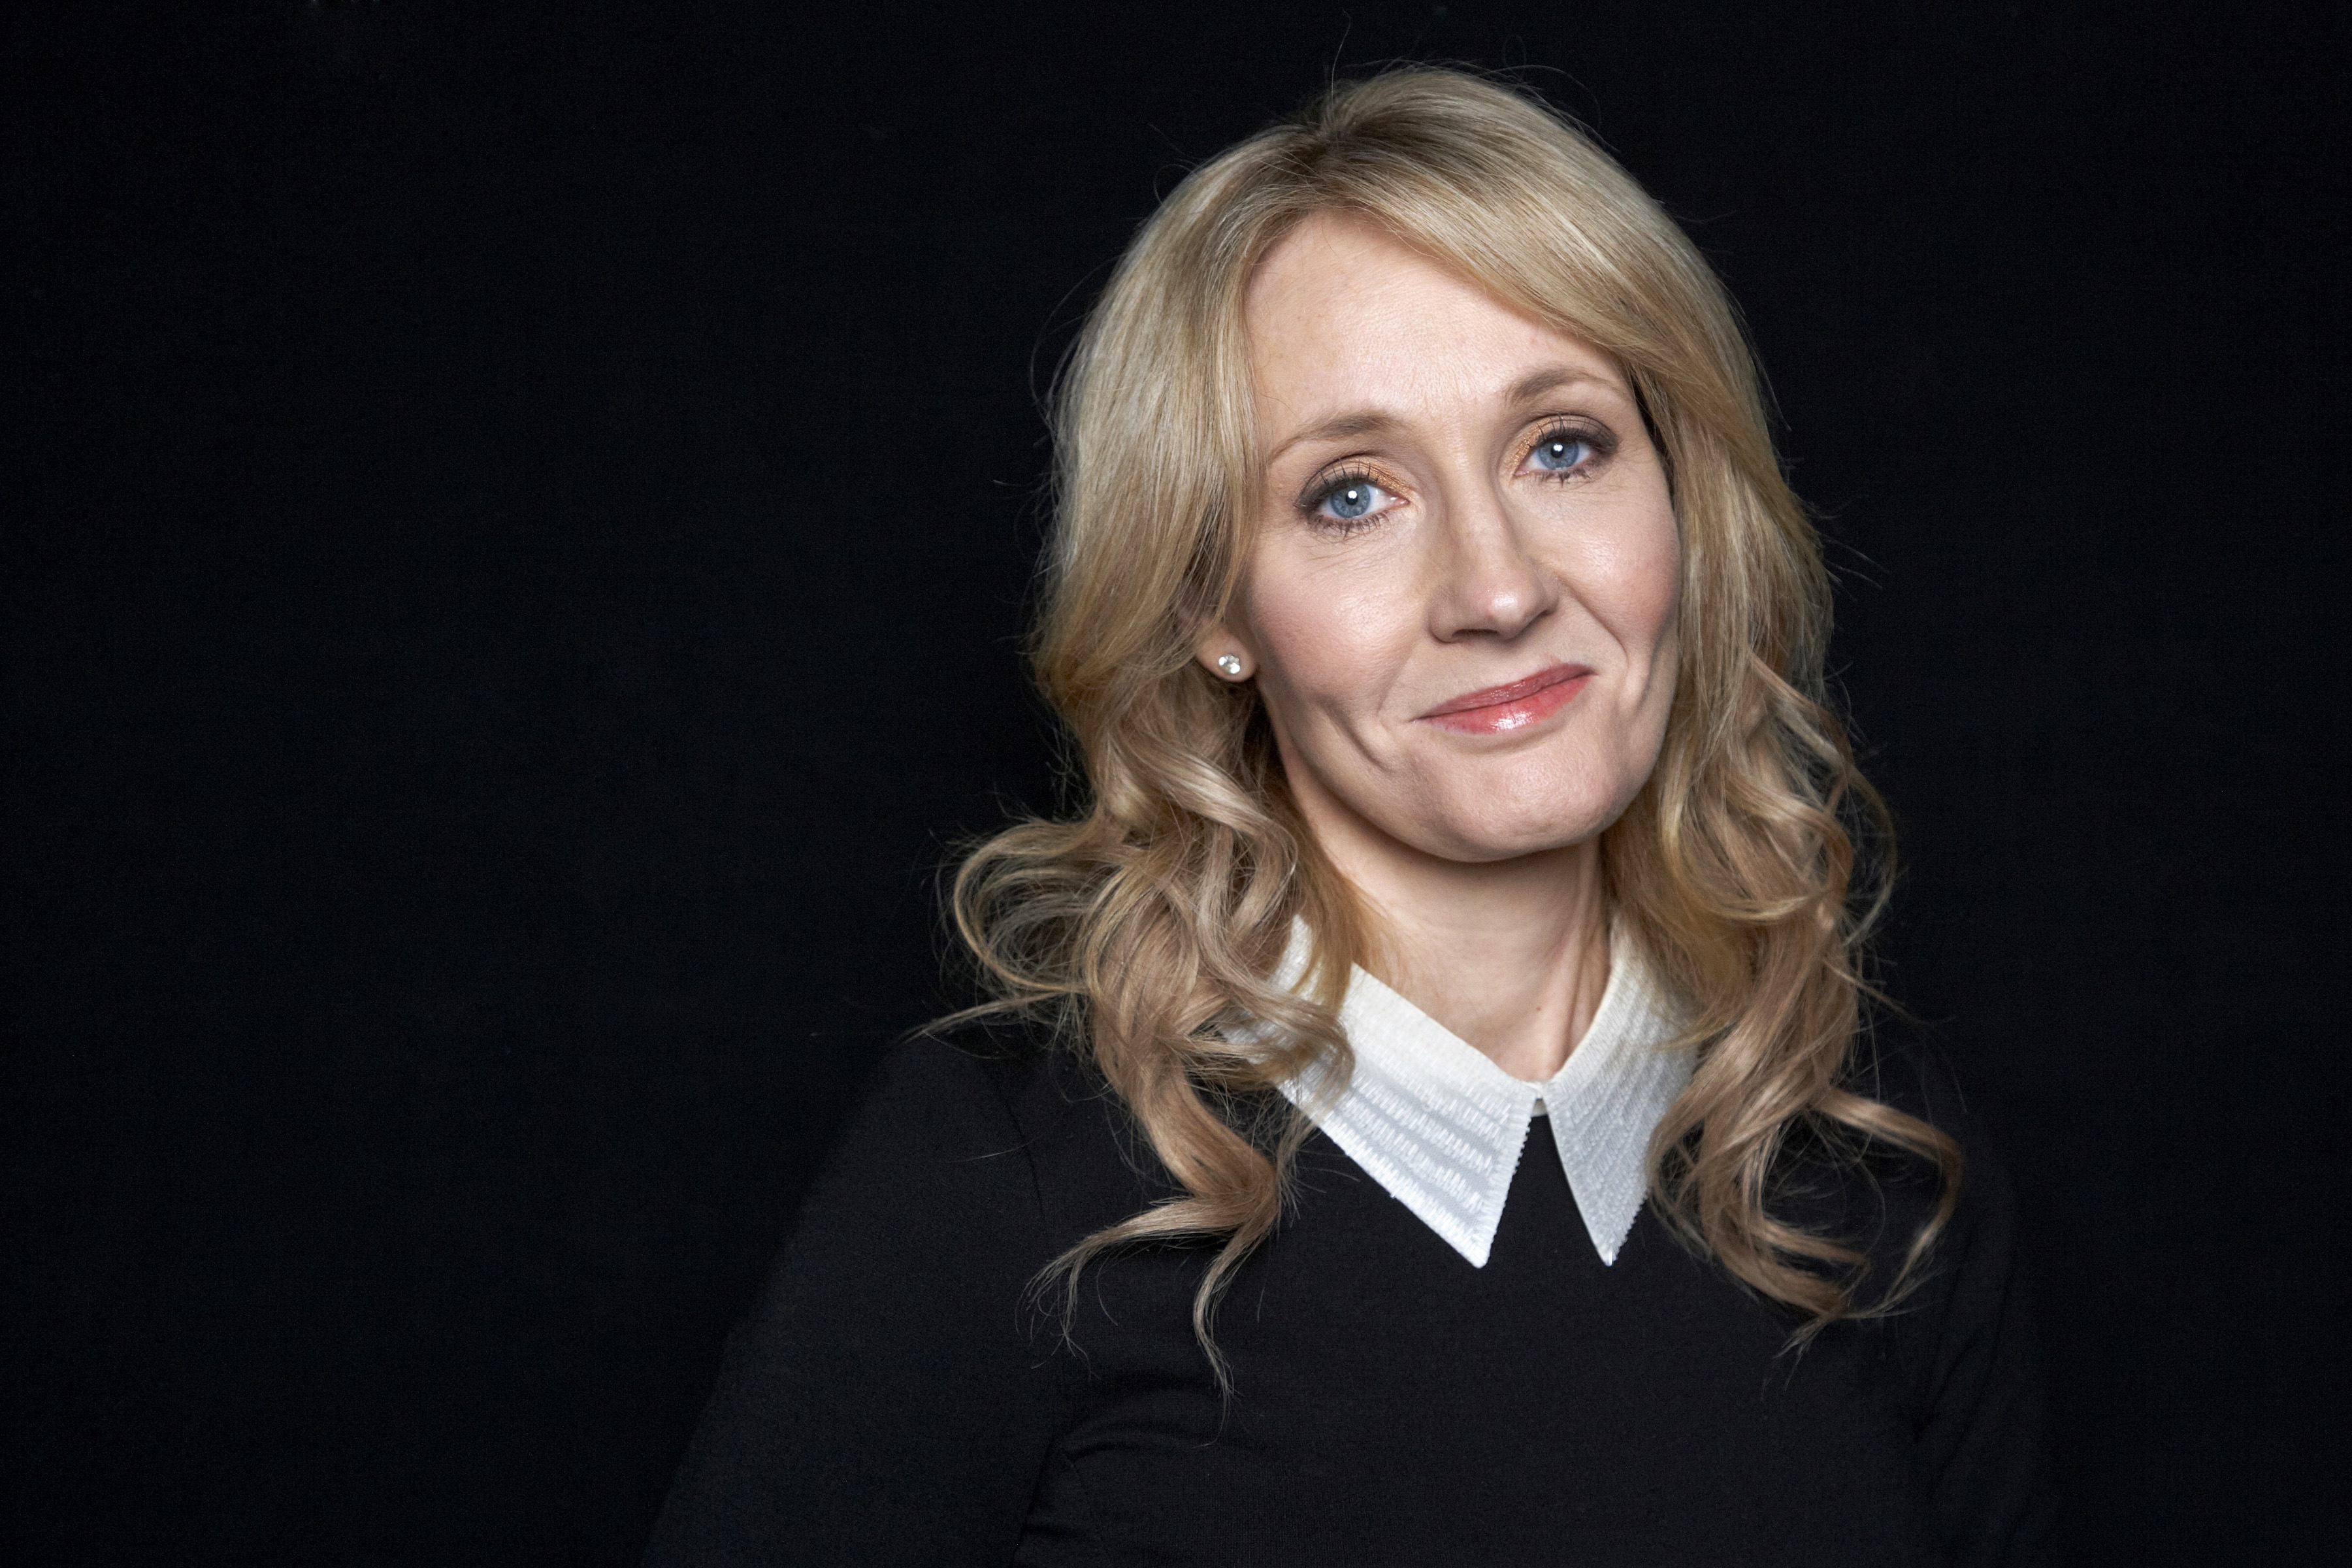 J.K. Rowling has a new children’s book, ‘The Christmas Pig,’ out in October